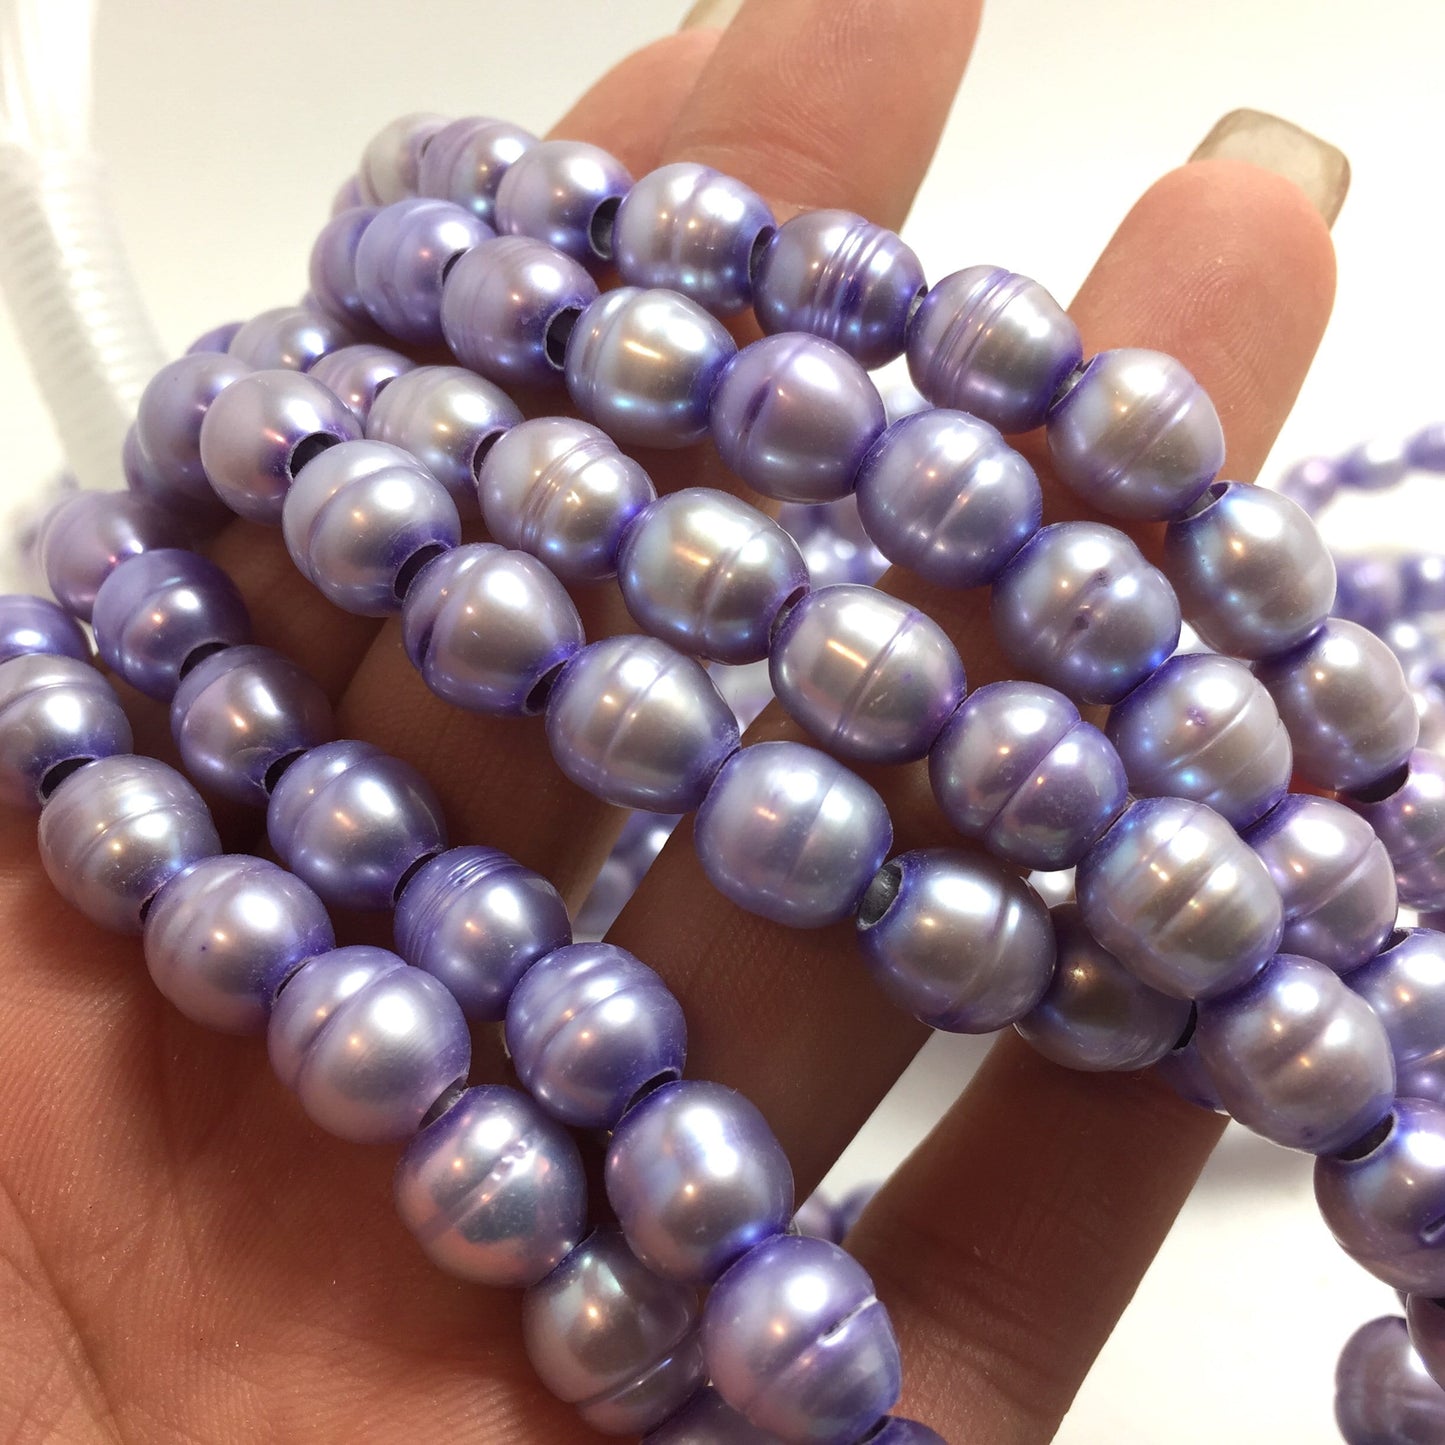 Large Hole Pearls 8-8.5mm Purple Rice Shape Freshwater Pearls, 8 inches with 2.5mm Hole, LH054